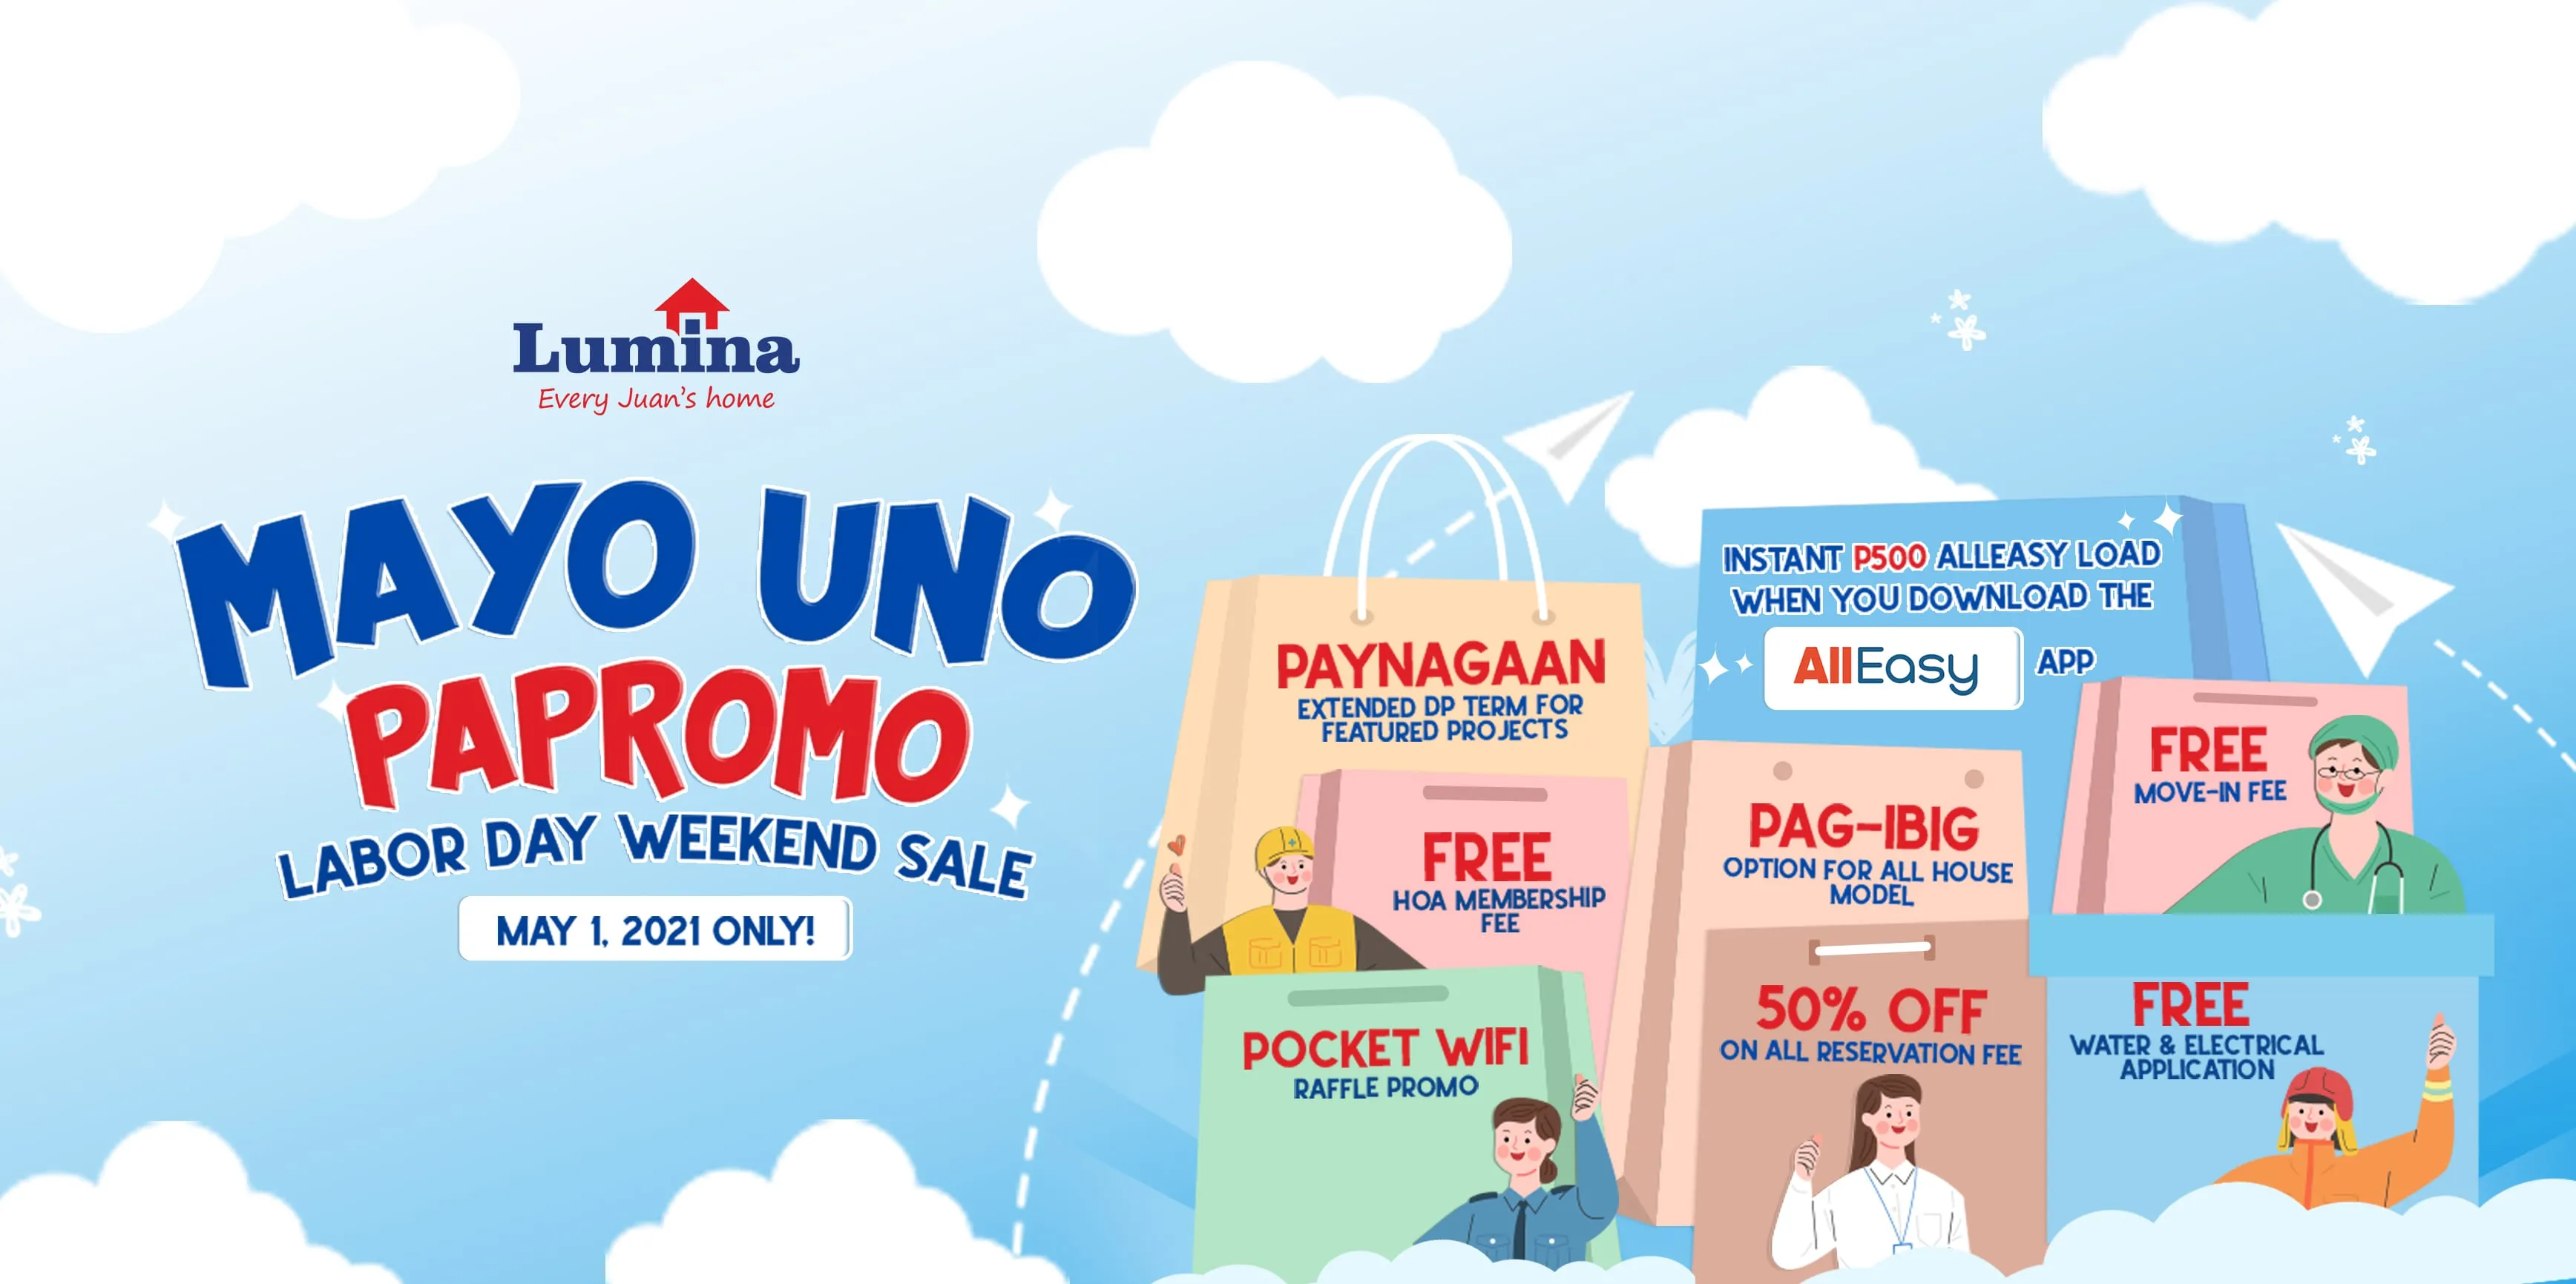 Lumina Presents Mayo Uno Papromo for Filipino Workers House and Lot for Sale Philippines Labor Day Promo